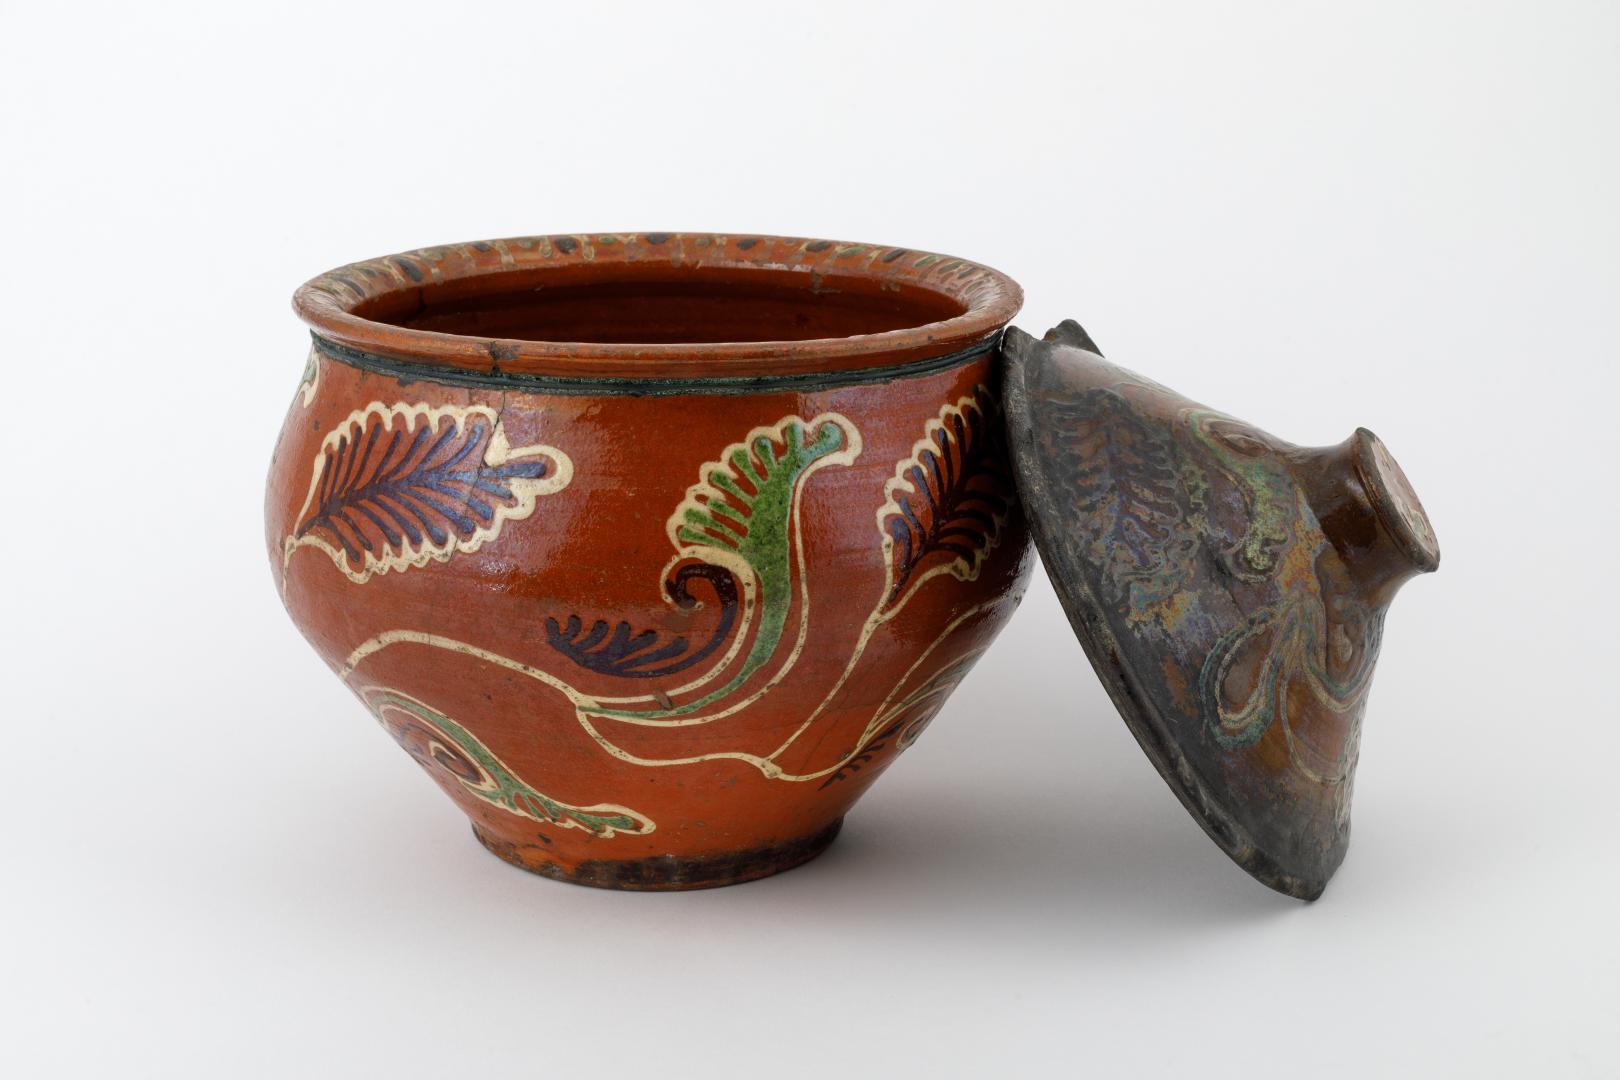 Makitra (bowl) with a lid